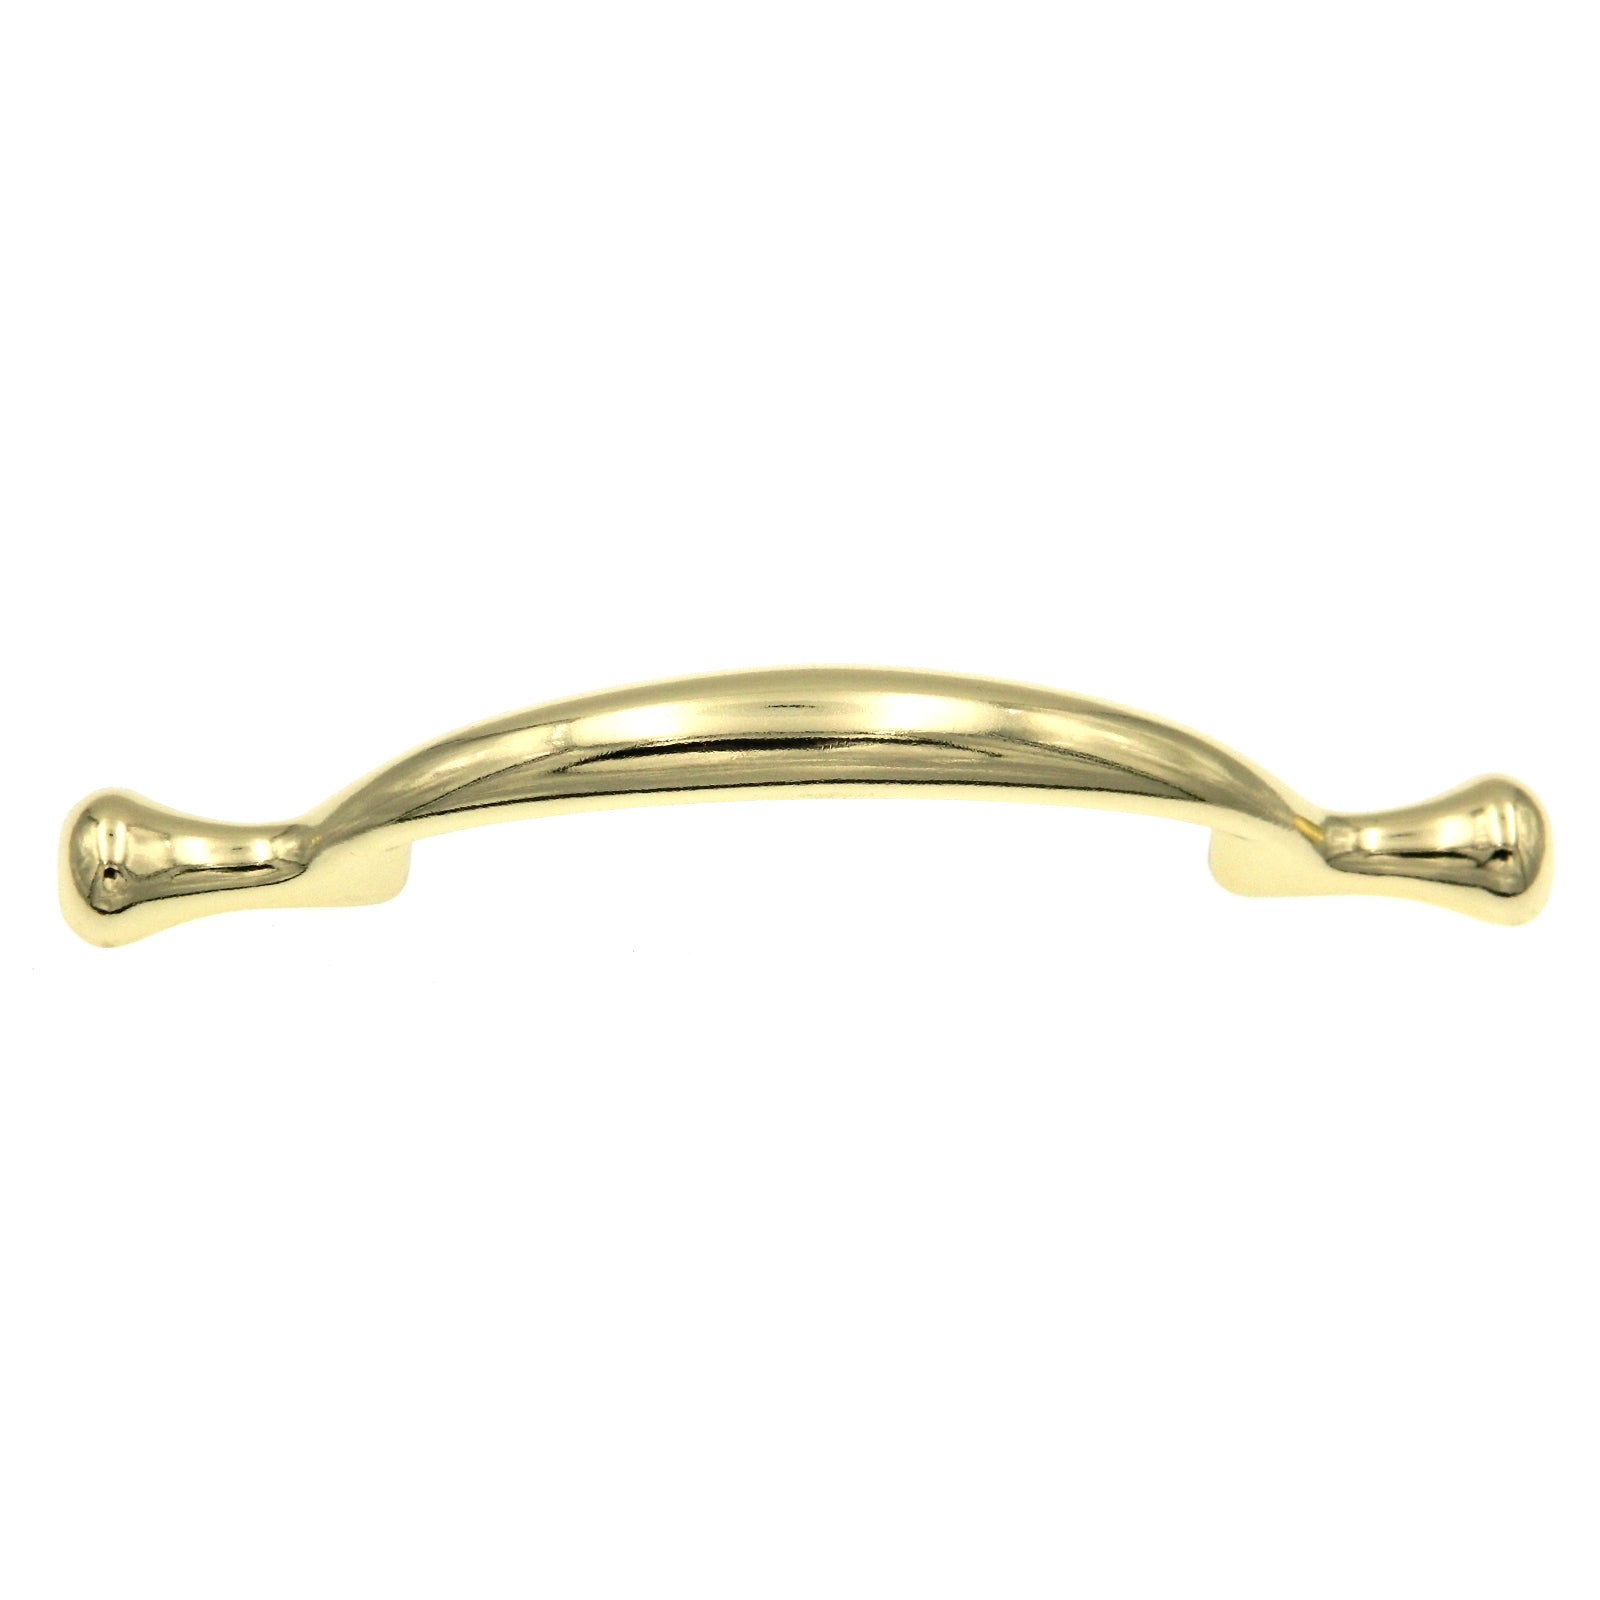 Polished Brass 3"cc Cabinet Handle Pulls Belwith's Conquest P14174-3, 10 Pack